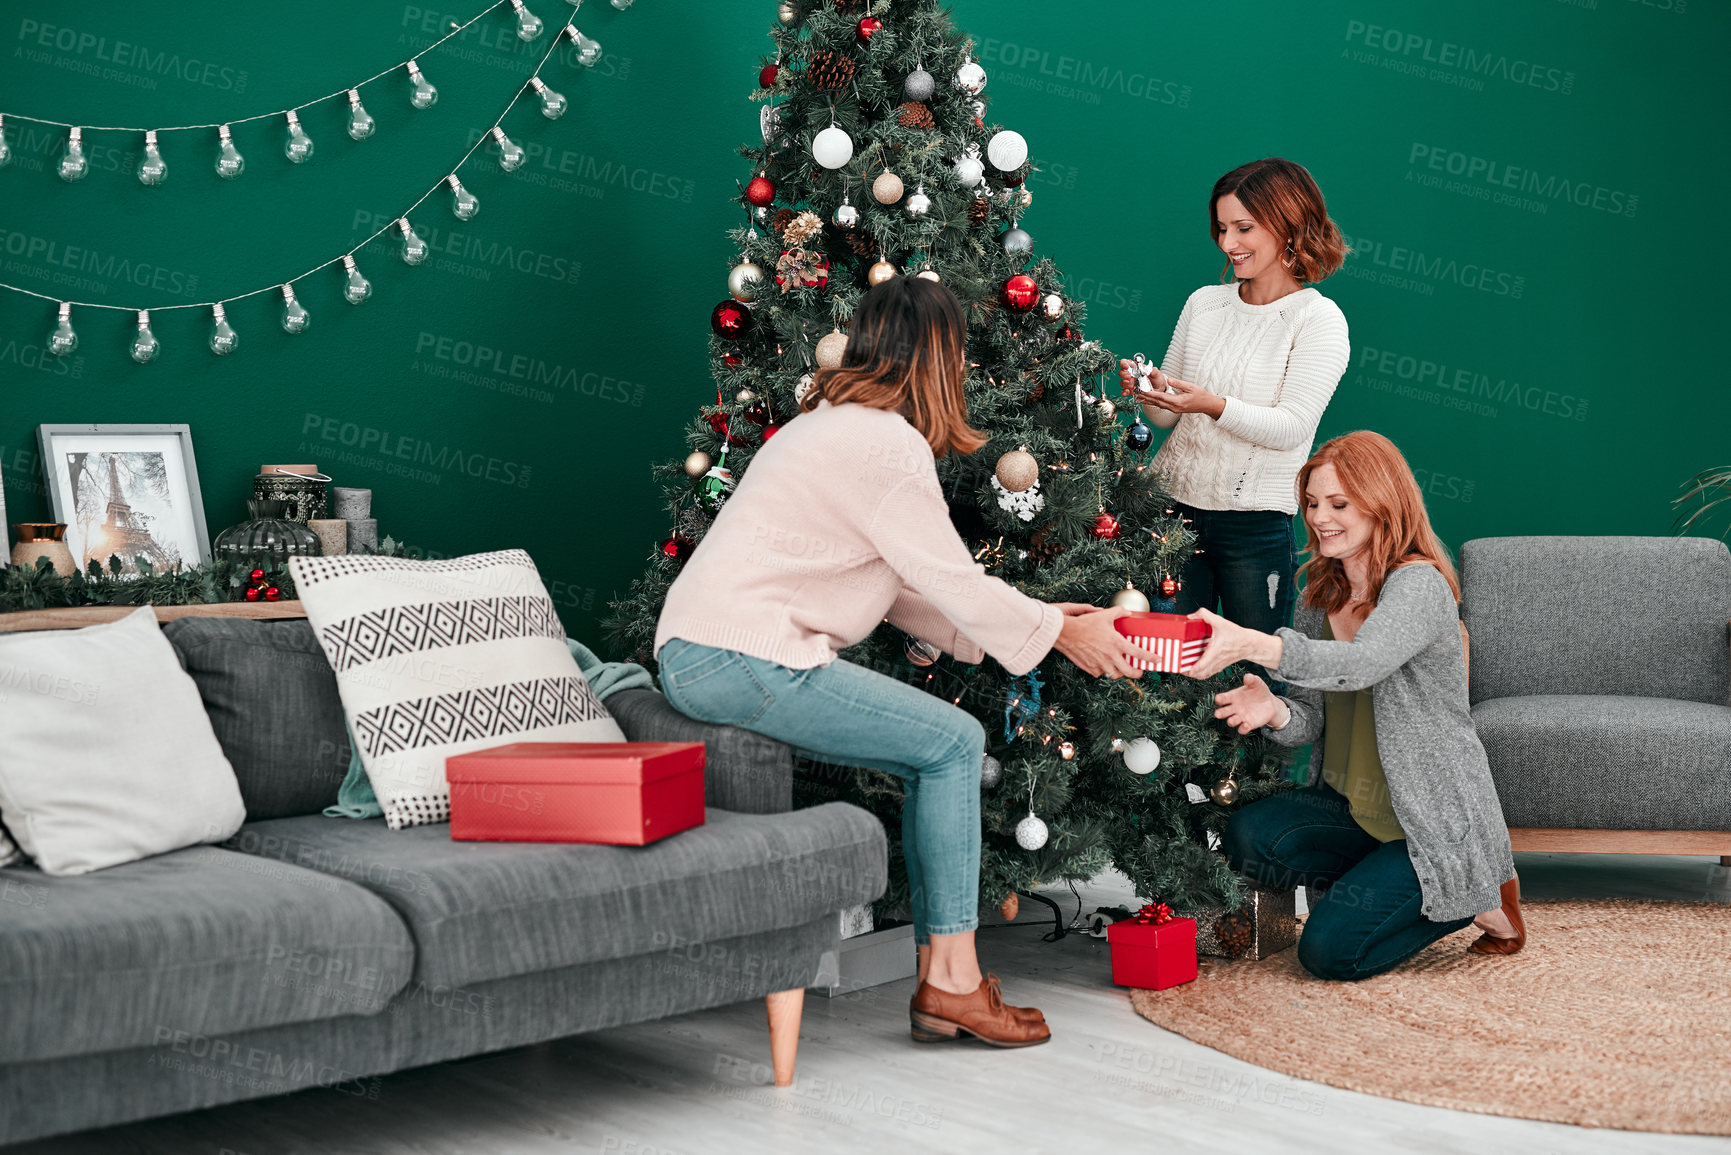 Buy stock photo Shot of three attractive women decorating a Christmas tree together at home